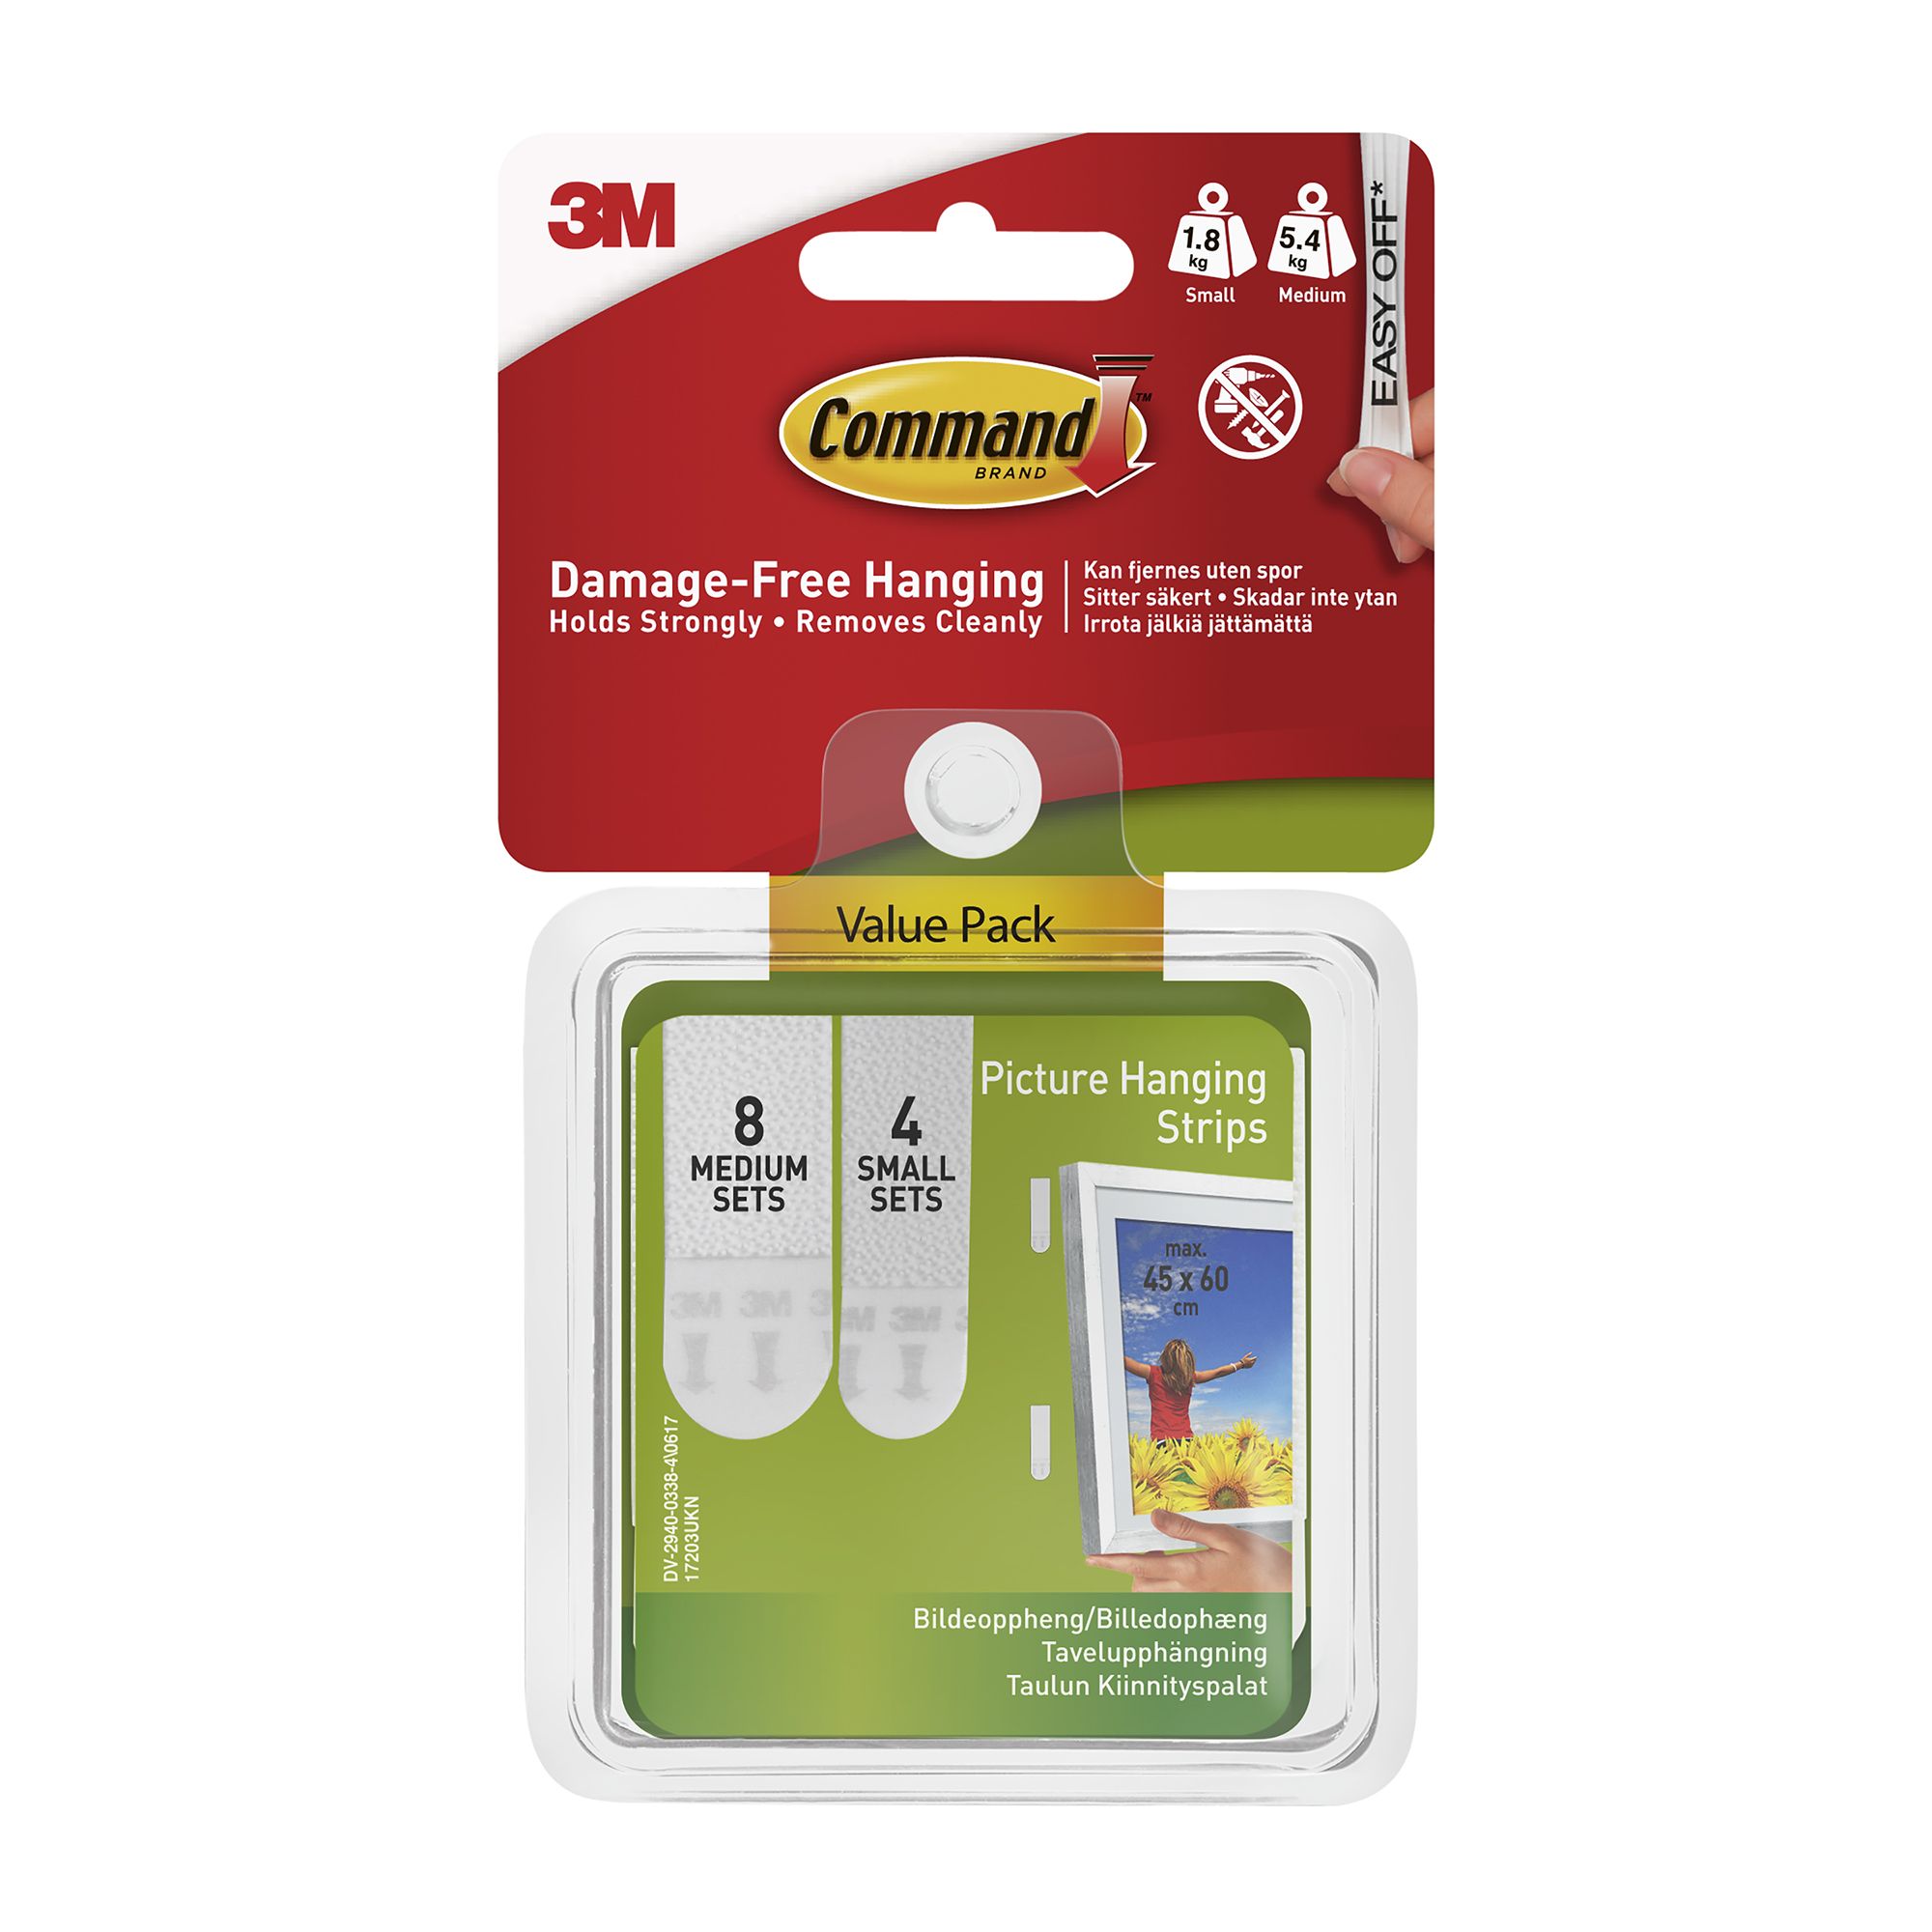 Command White Medium Picture Hanging Strips - Pack of 3